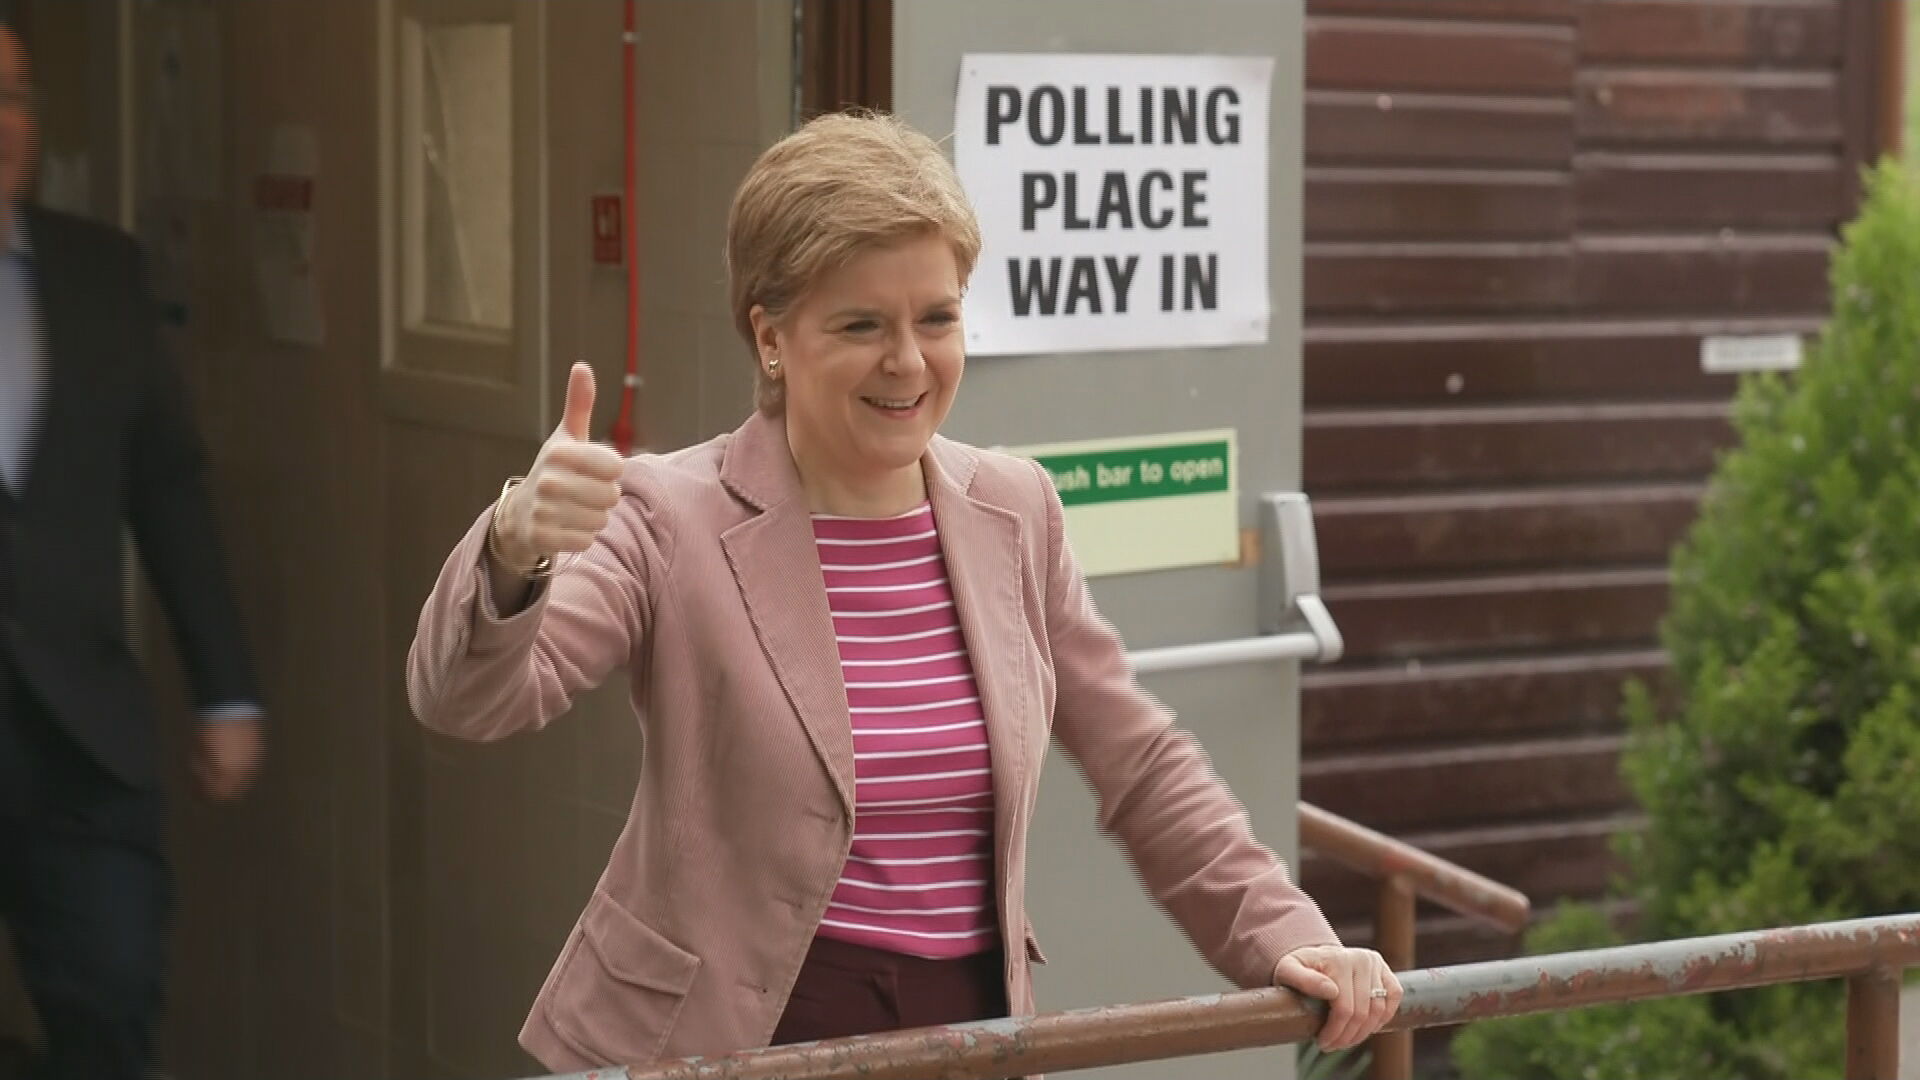 Nicola Sturgeon voted at her local polling station in the Baillieston area of Glasgow.